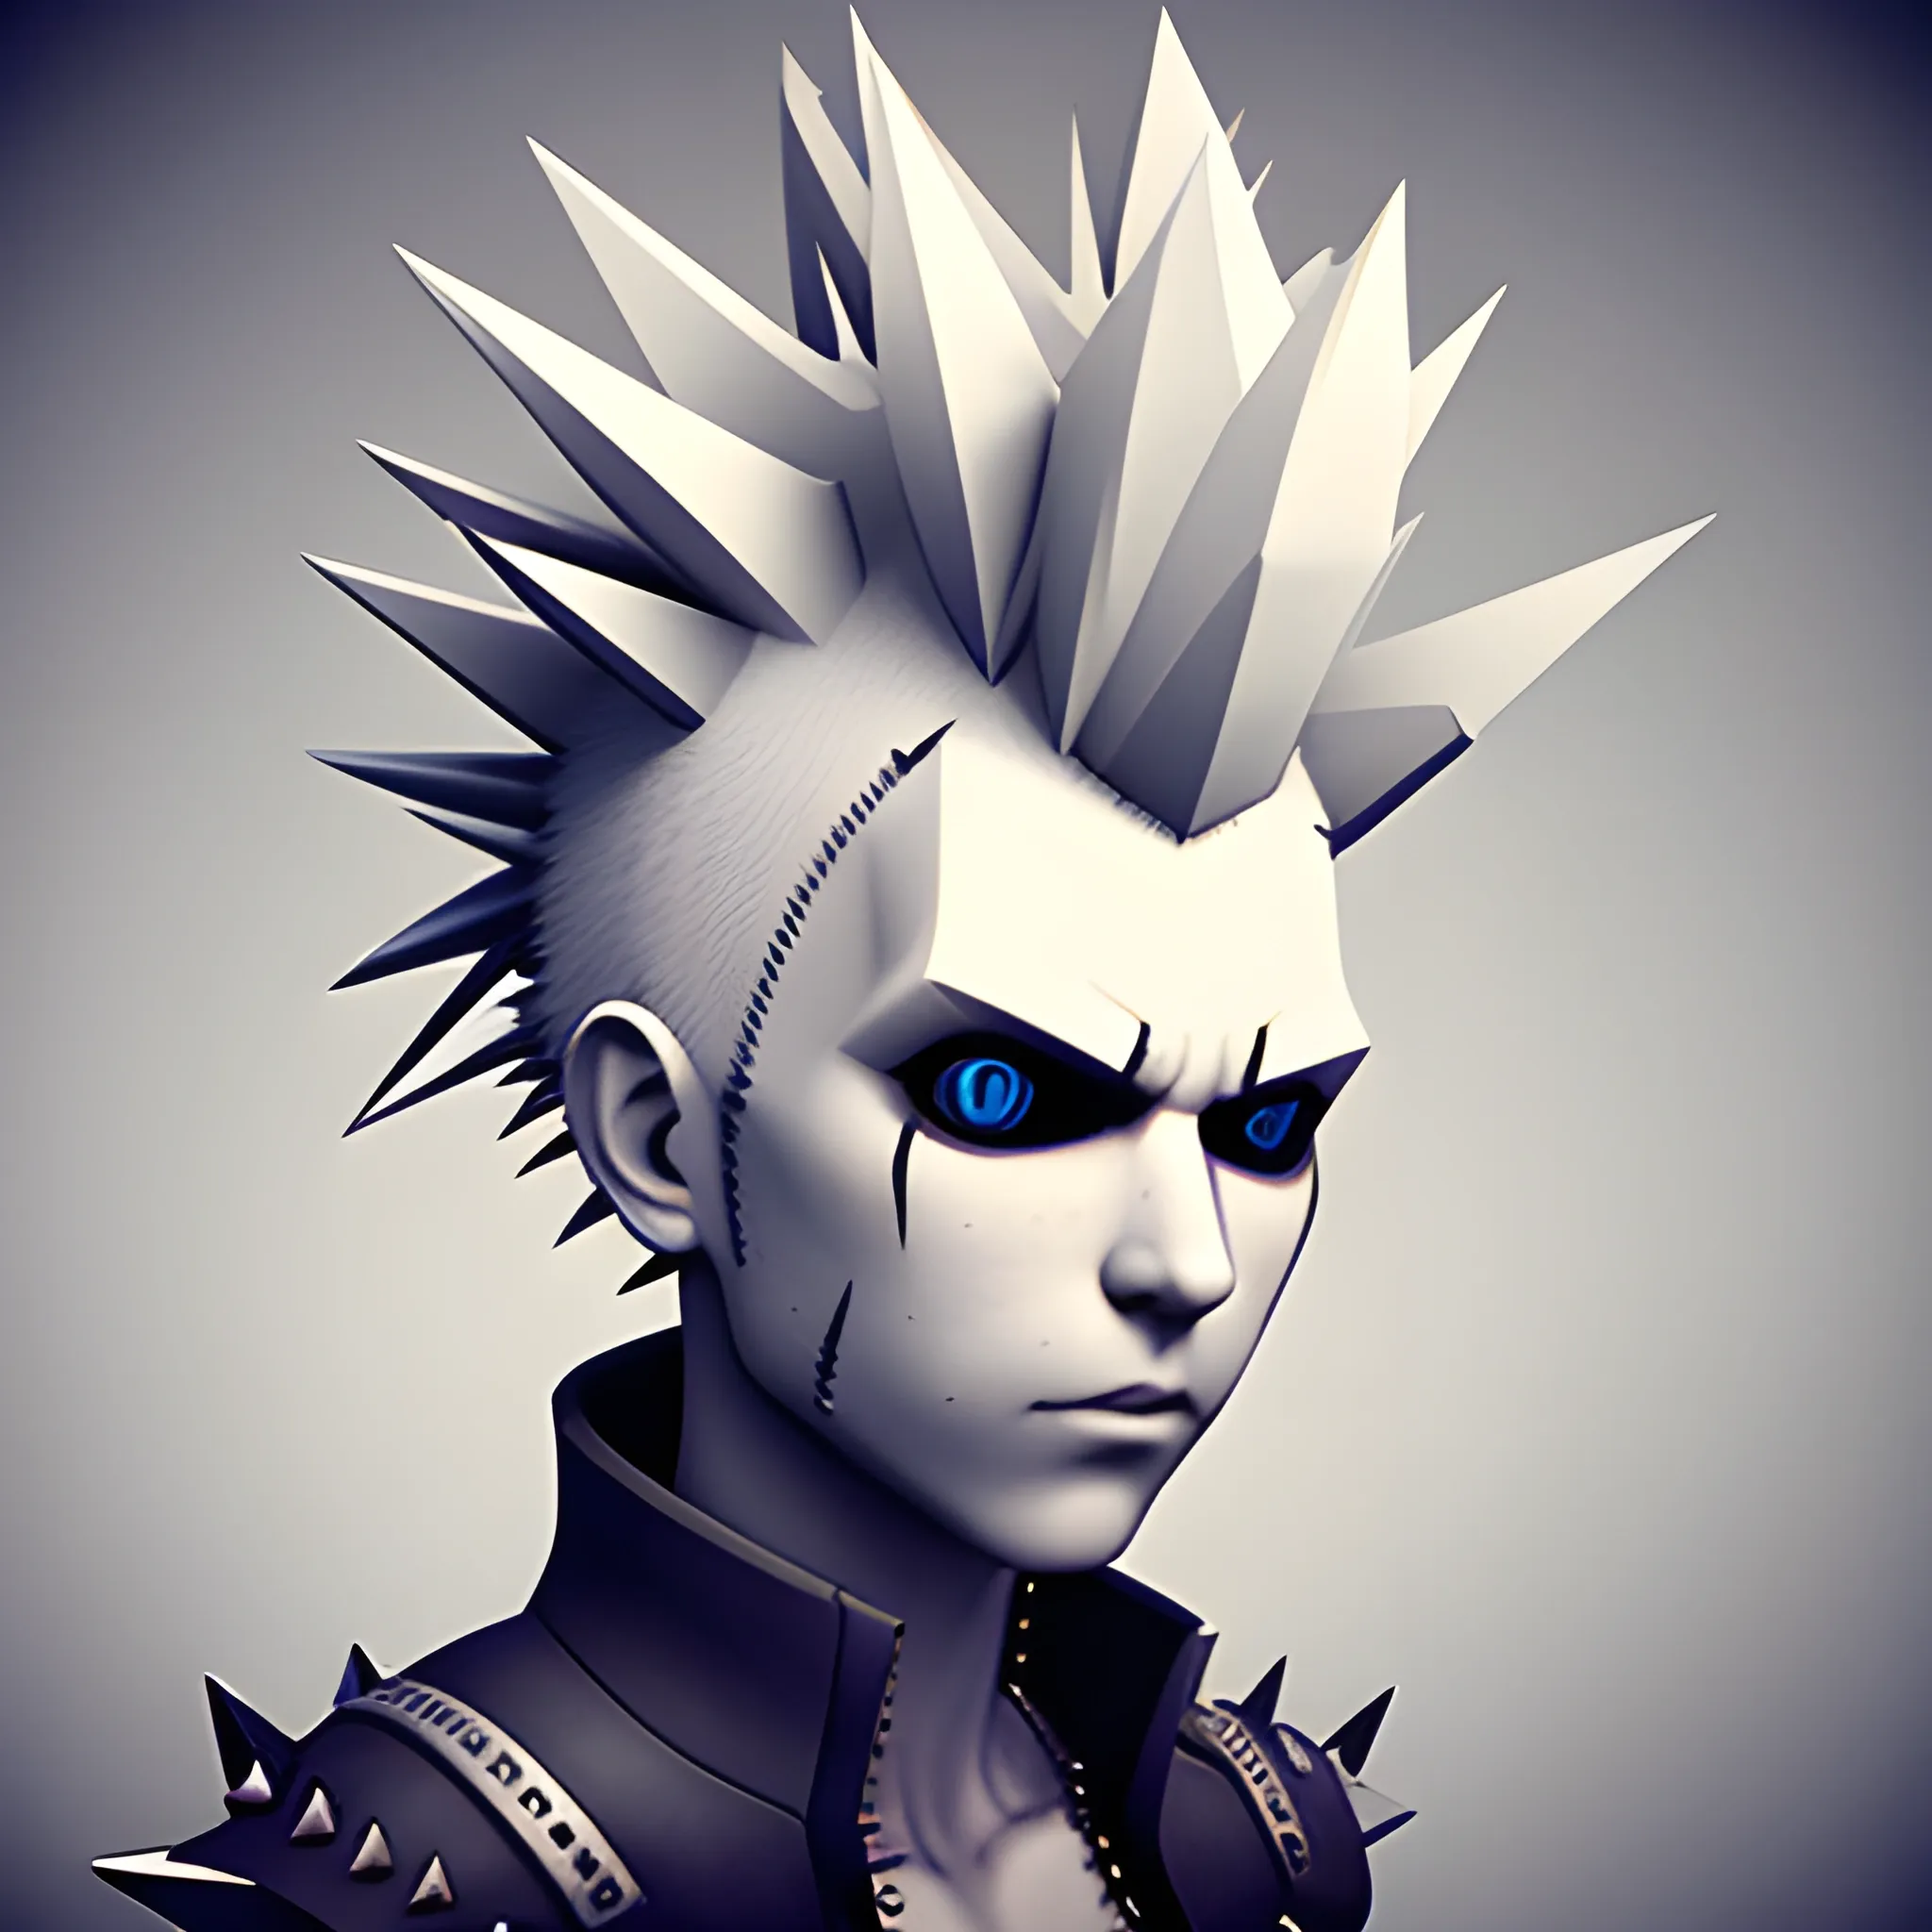 Spiky Head Punk White Character, 3D